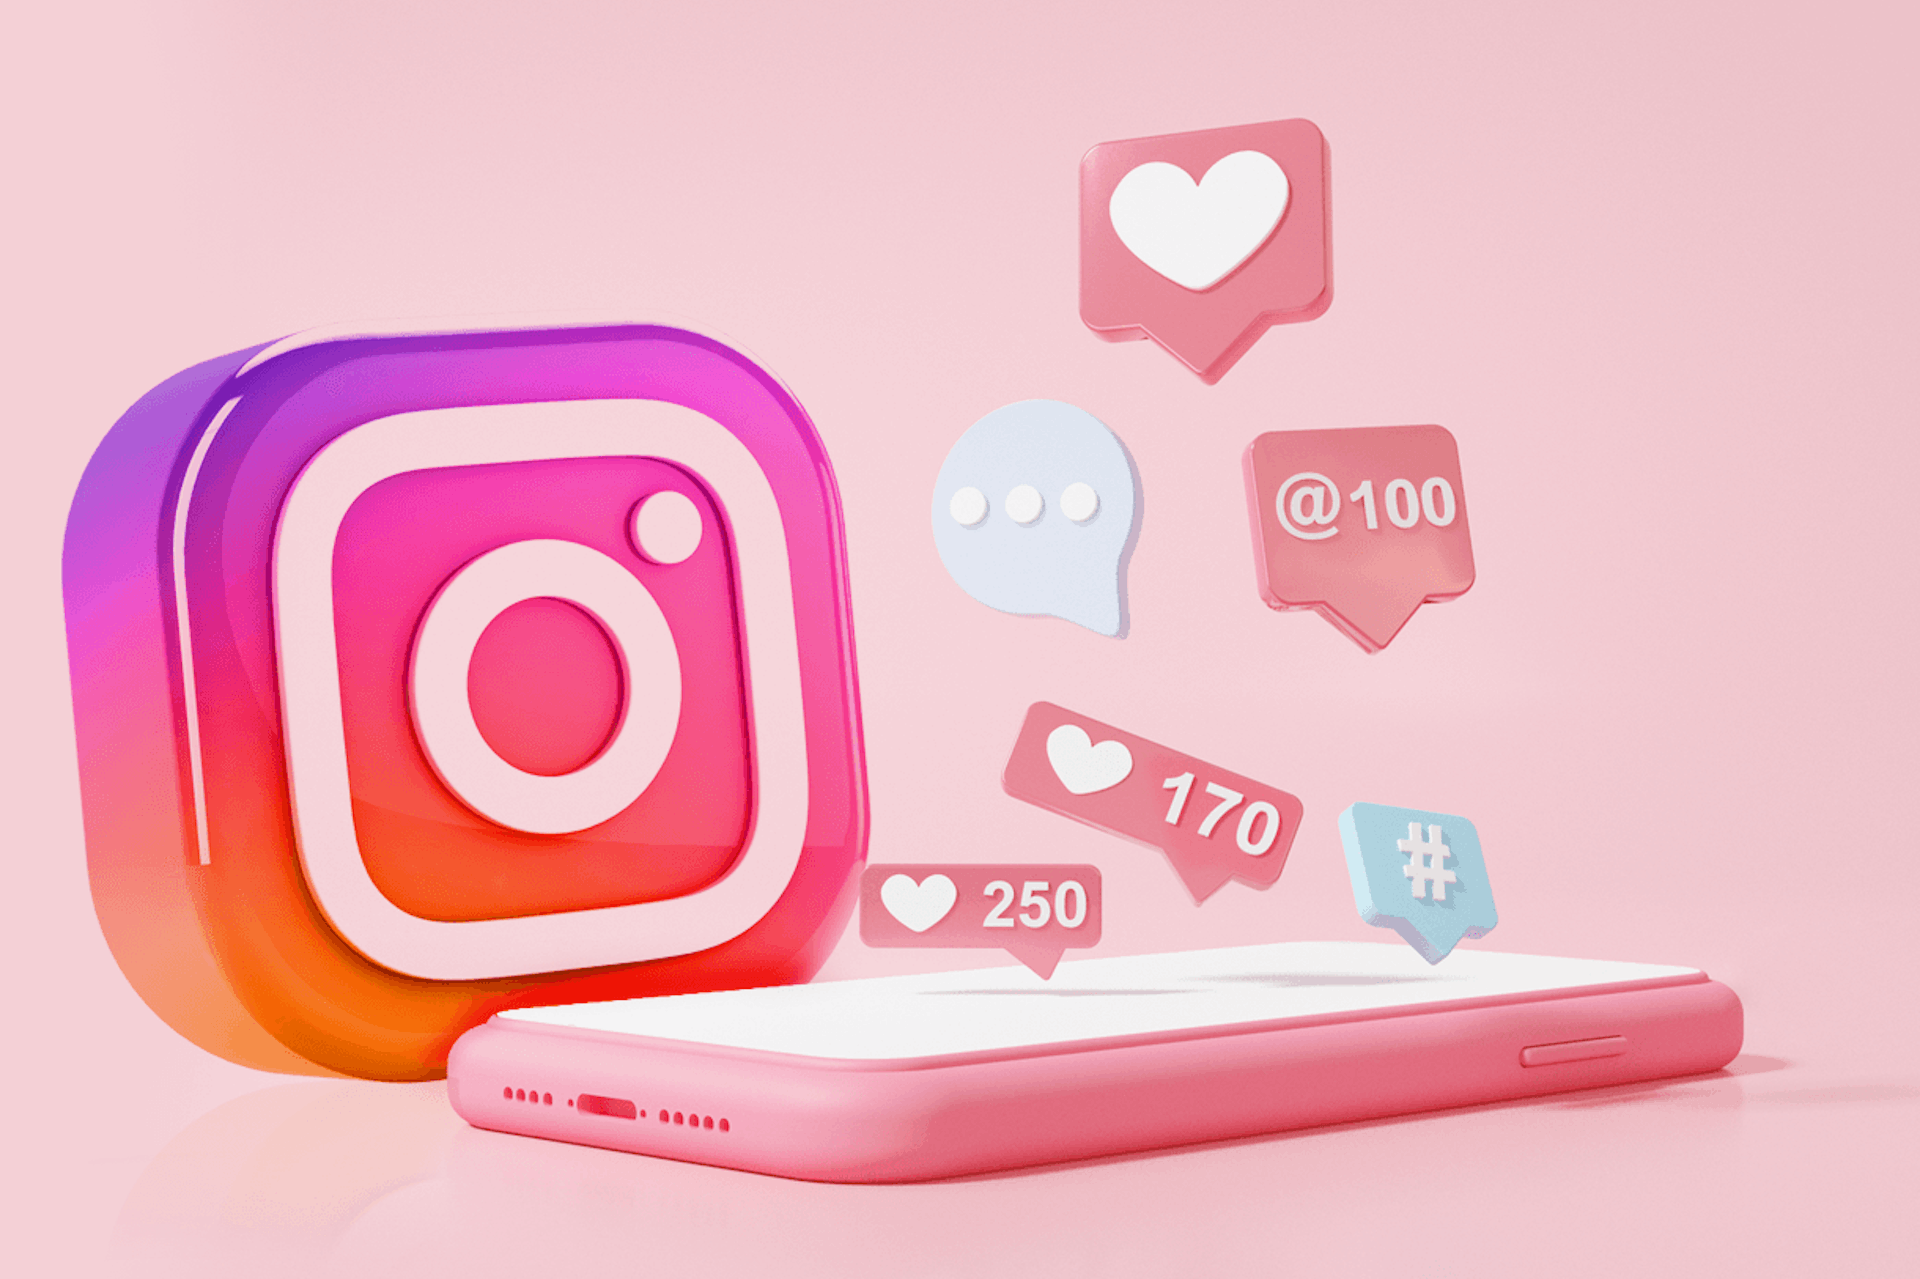 Image showing a large Instagram logo behind a phone with like symbols, hashtag symbol, and message bubble rising out, on a pale pink background for the top Instagram marketing examples